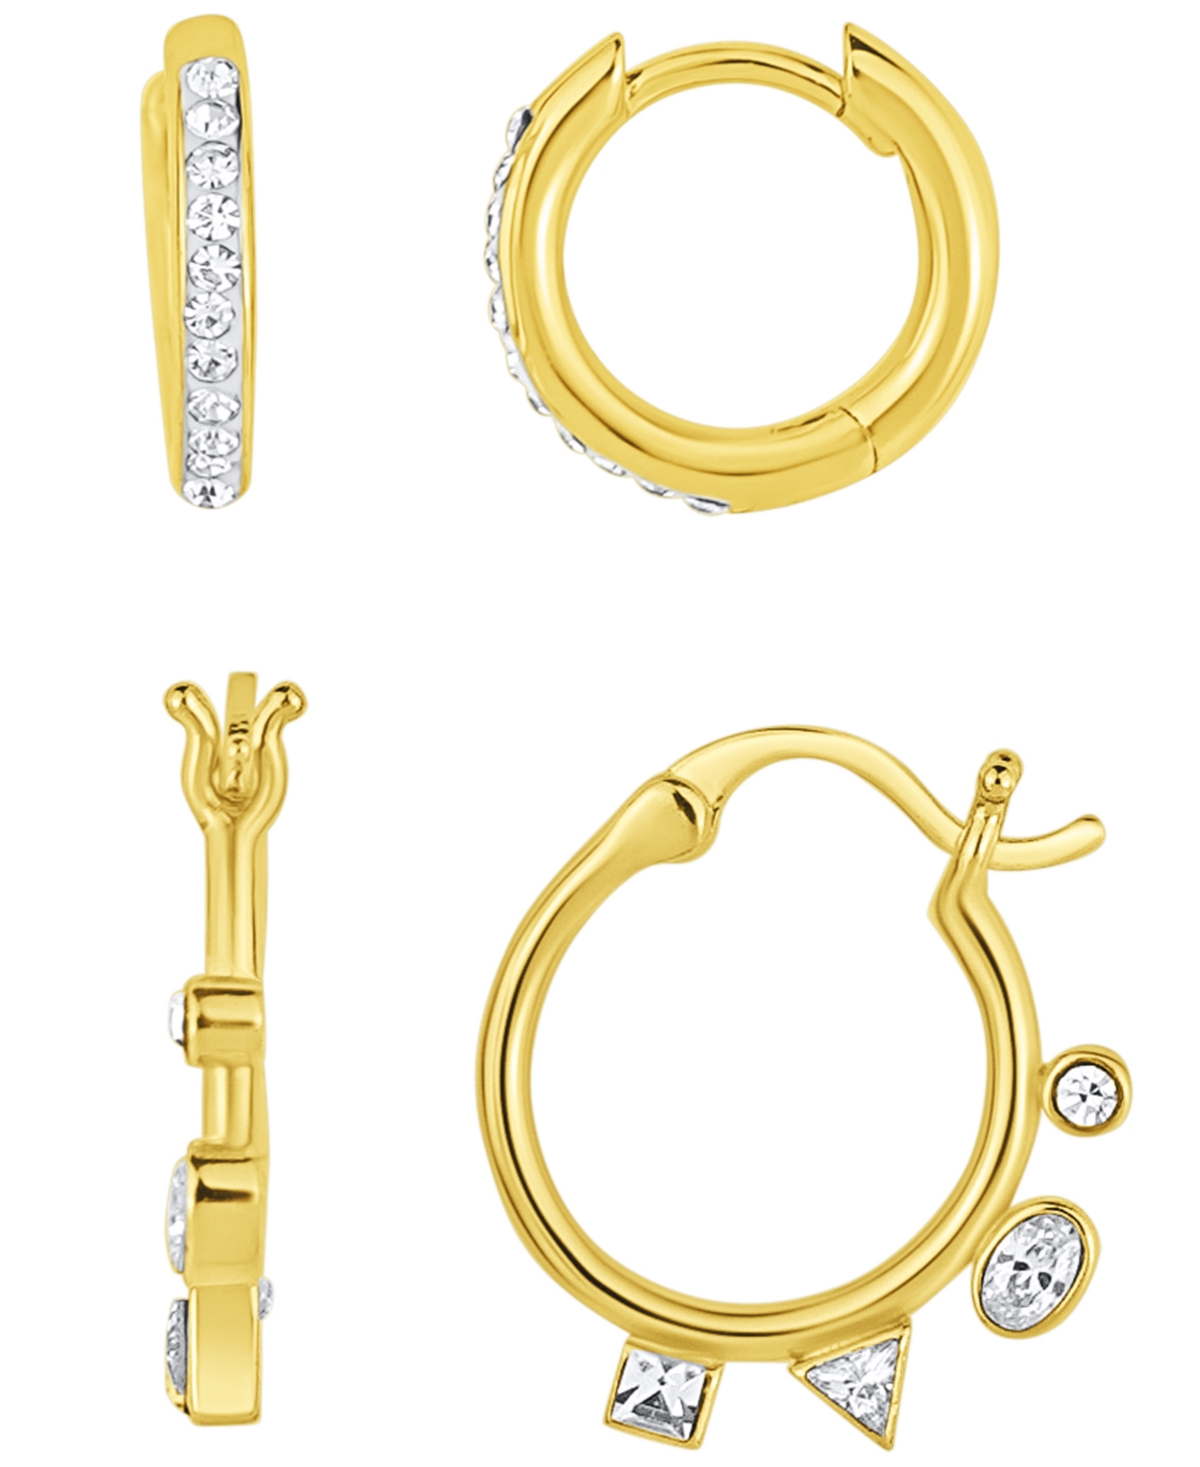 2 Pair Crystal Gold-Plated Hoop Earring Set - Gold-Plated